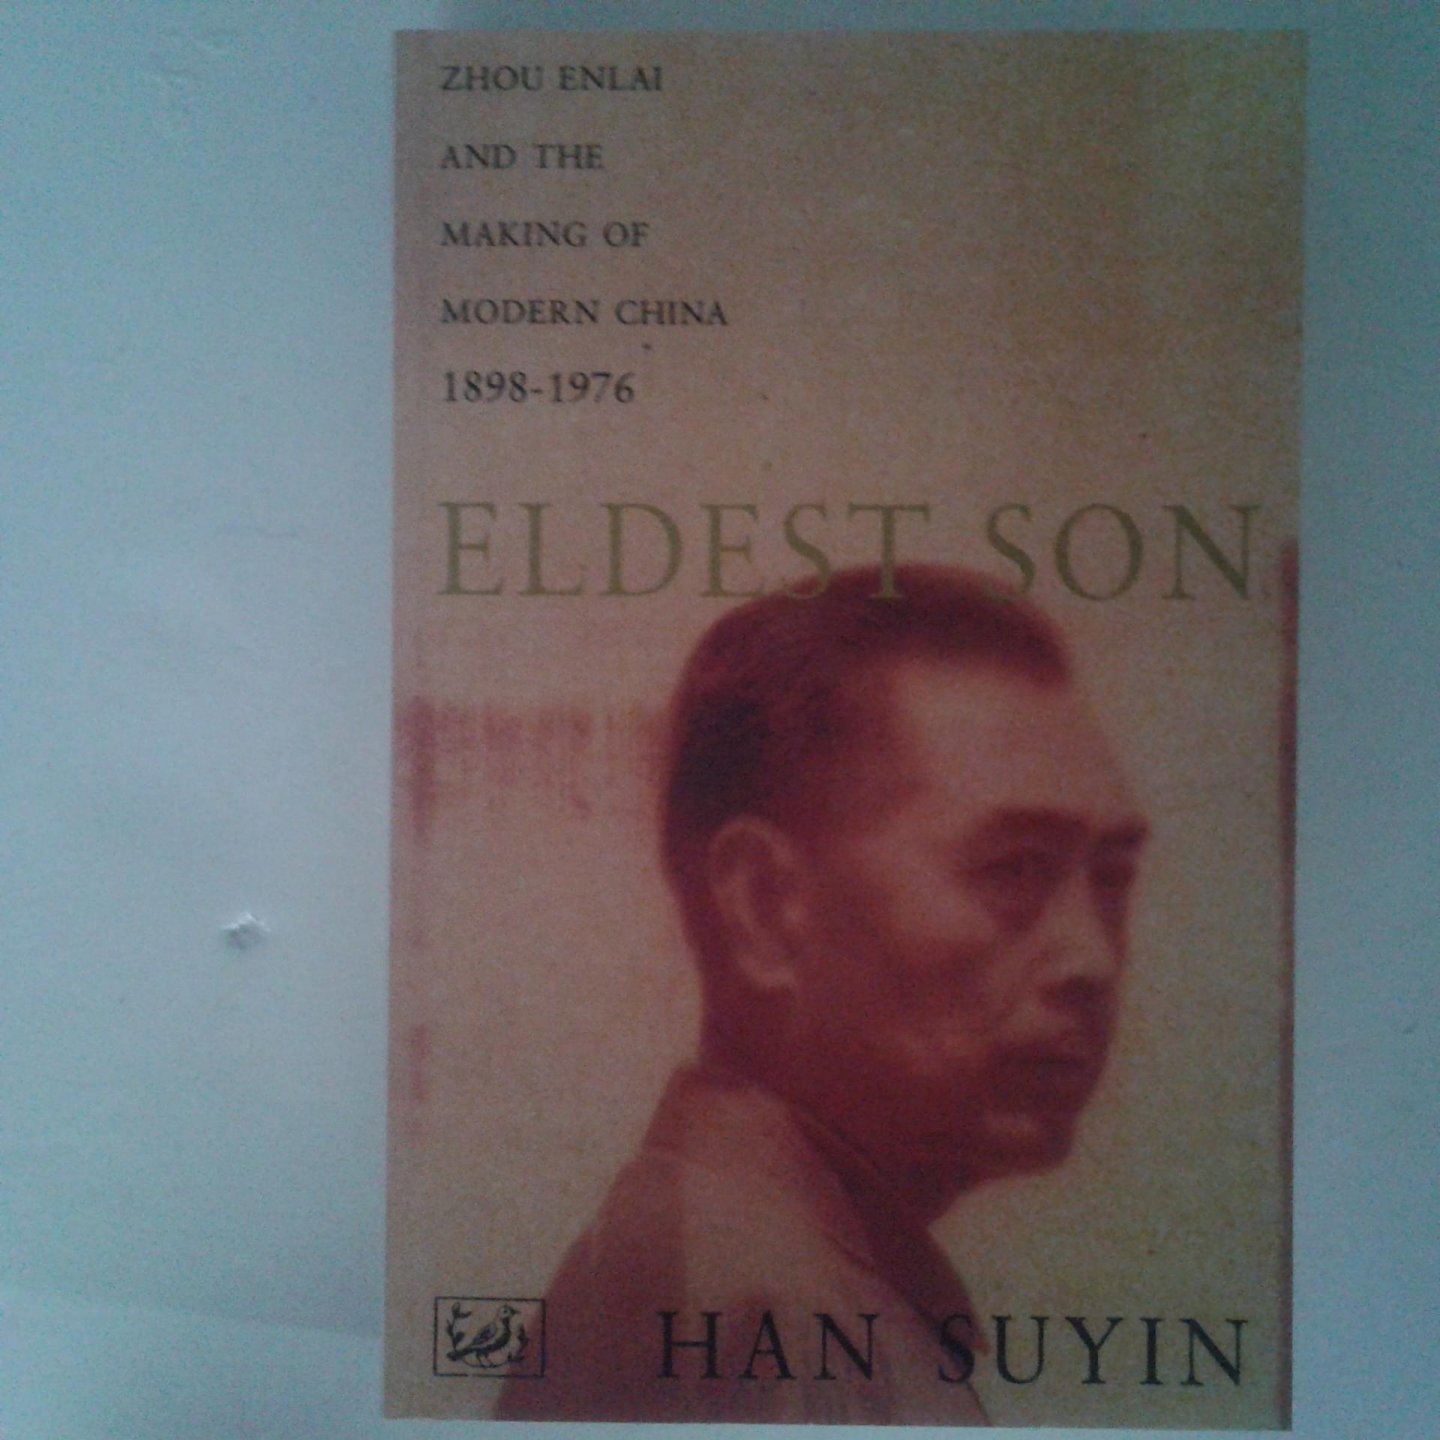 Suyin, Han - Eldest Son ; Zhou Enlai and the Making of Modern China 1898-1976